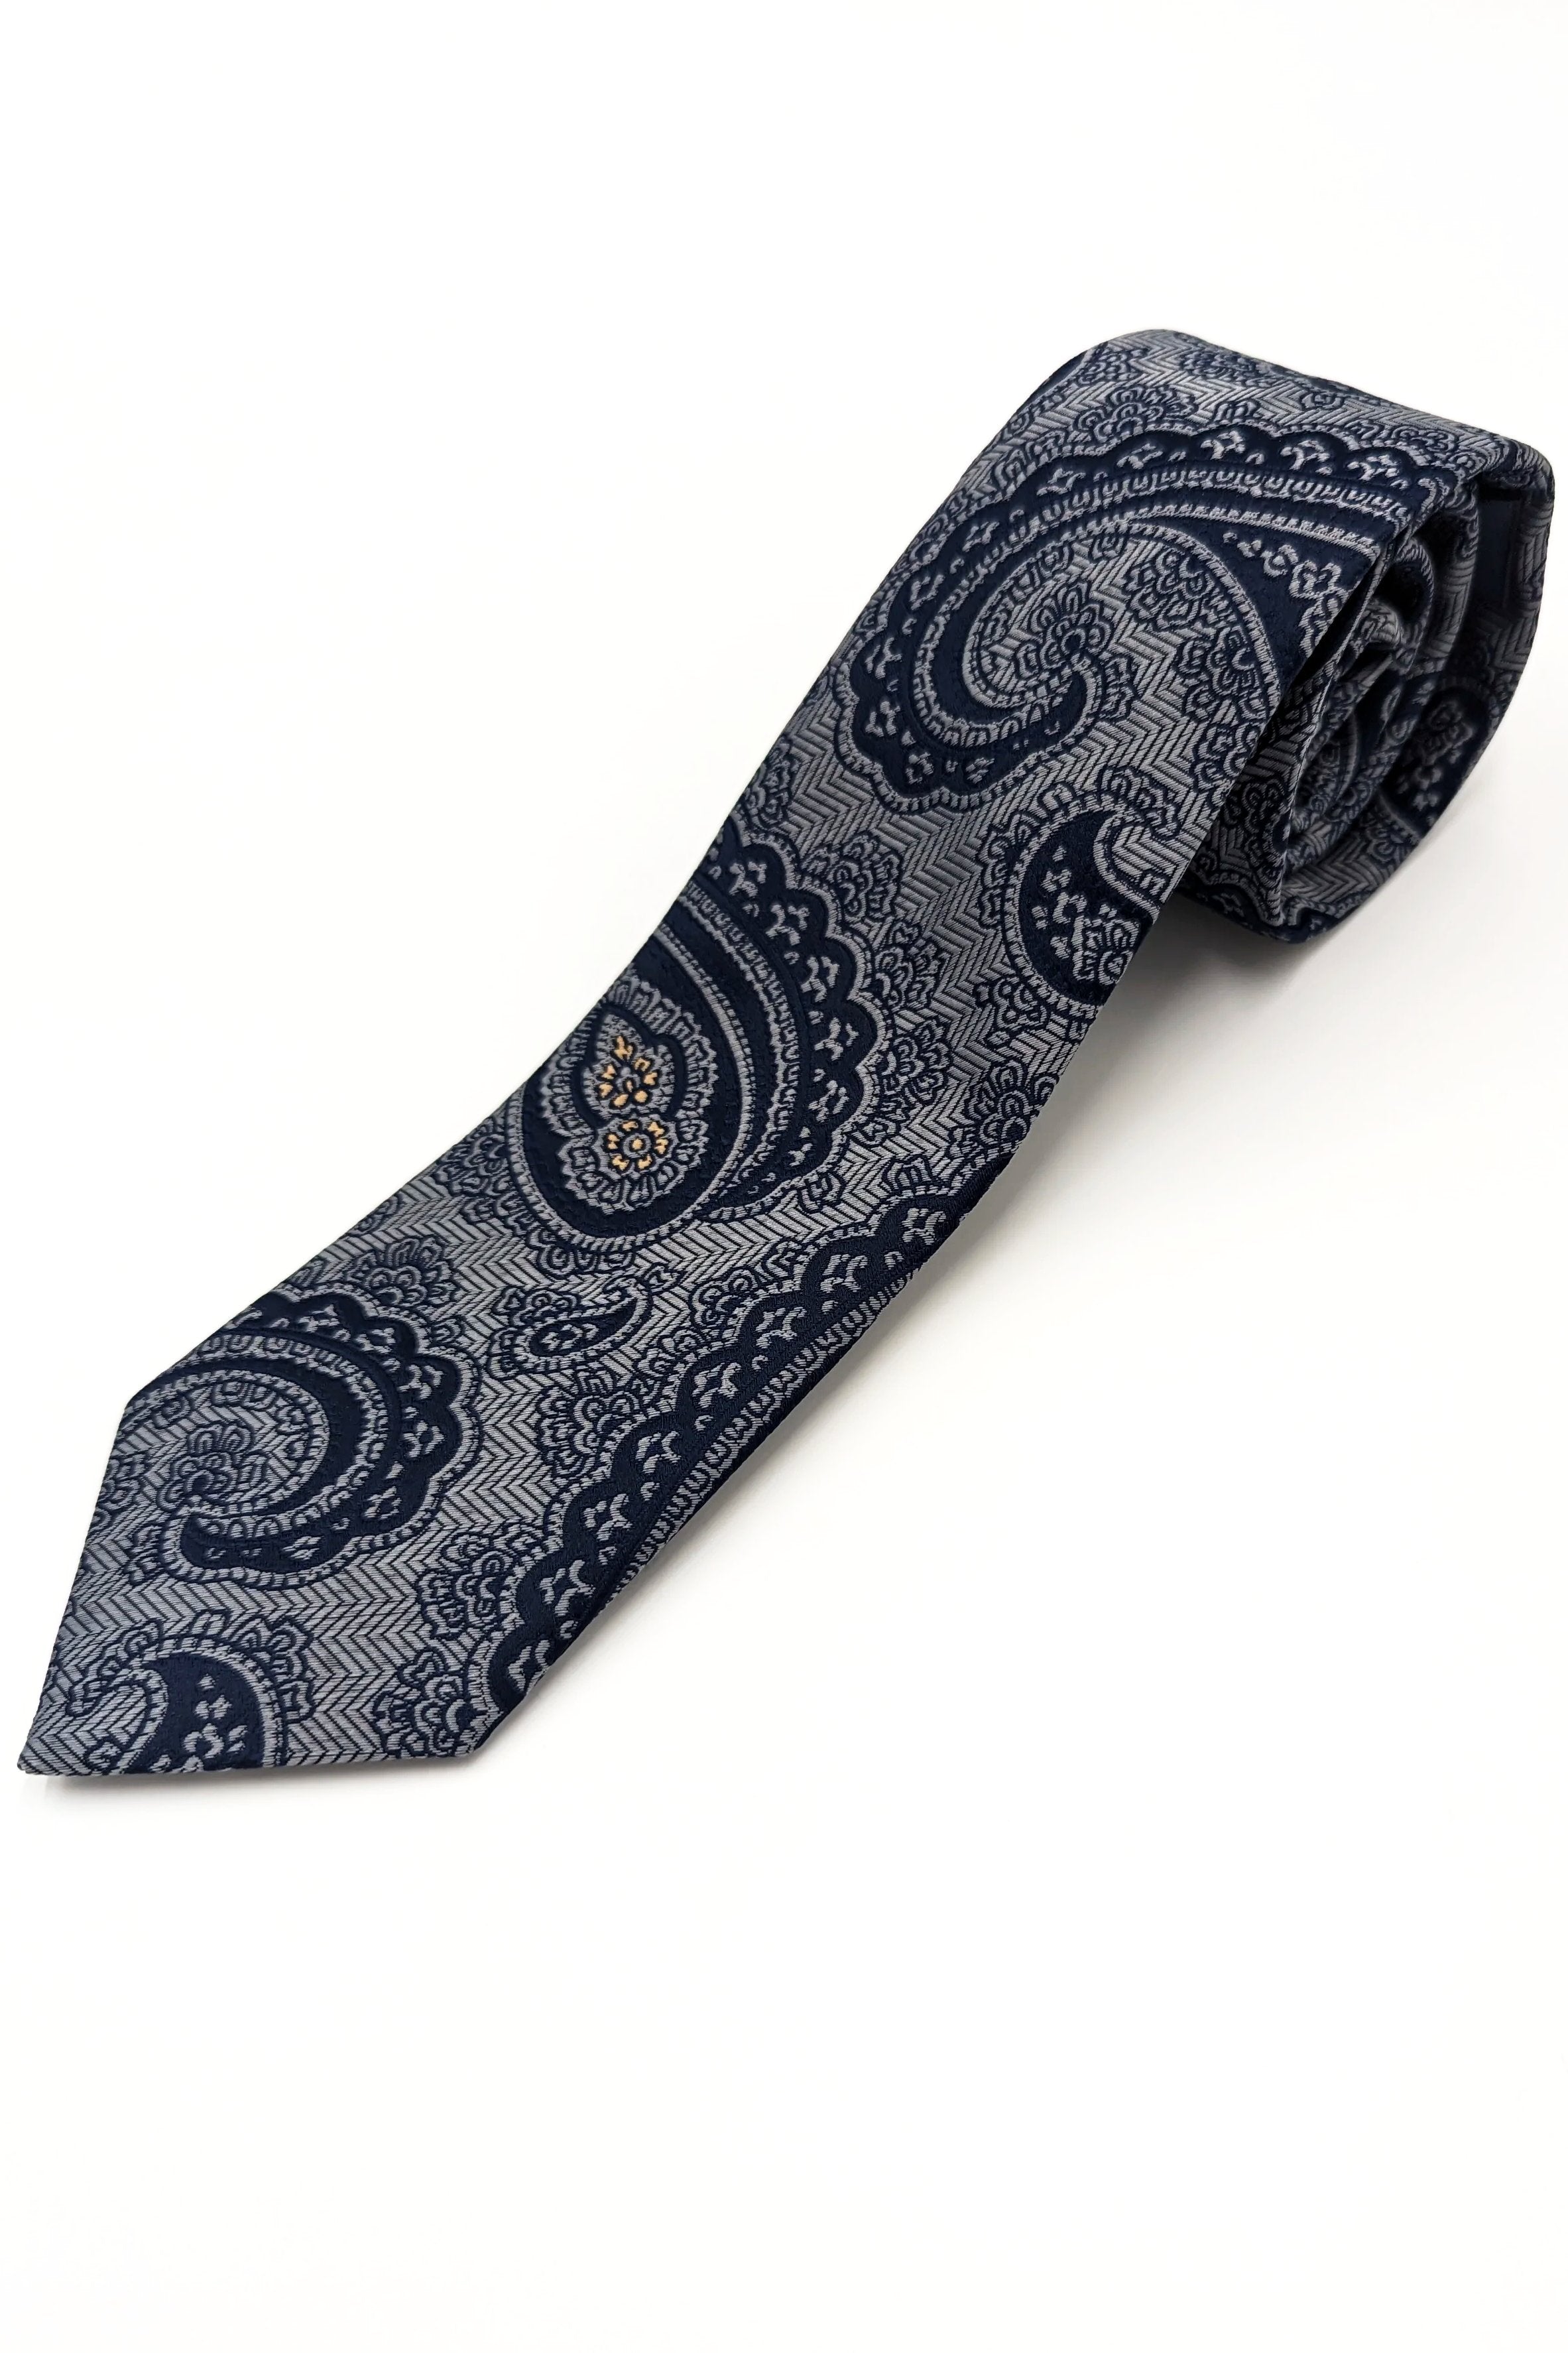 Paisley Tie Navy/Silver with Gold Spec